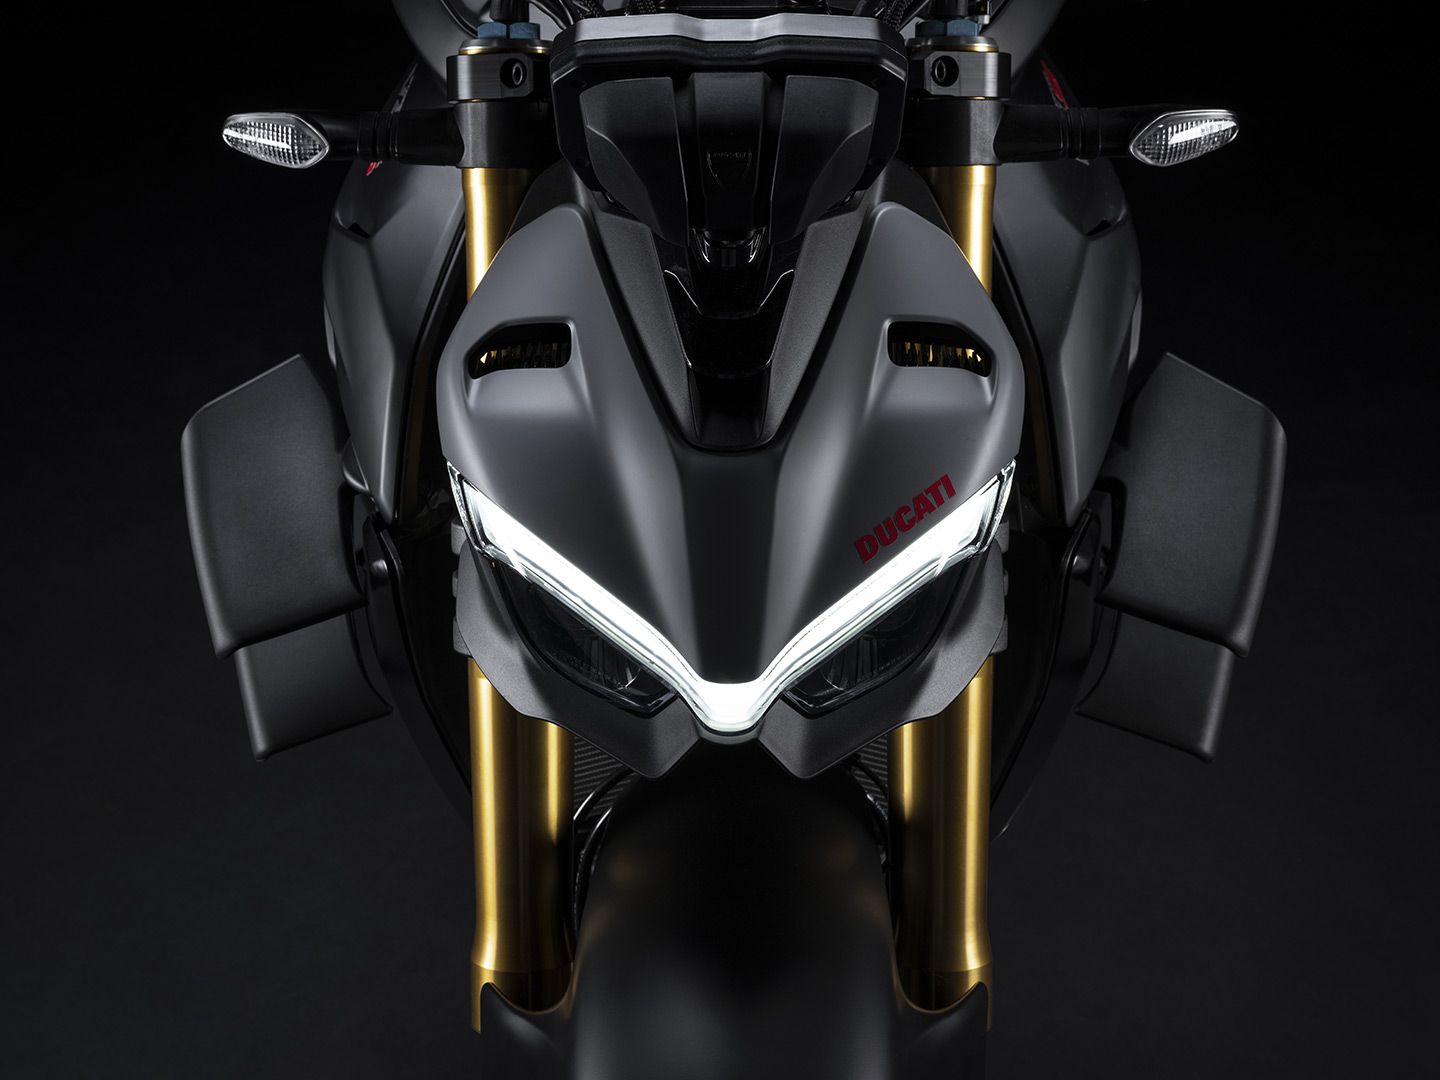 Hard to picture this as the face of a road-legal motorcycle. Menacing!